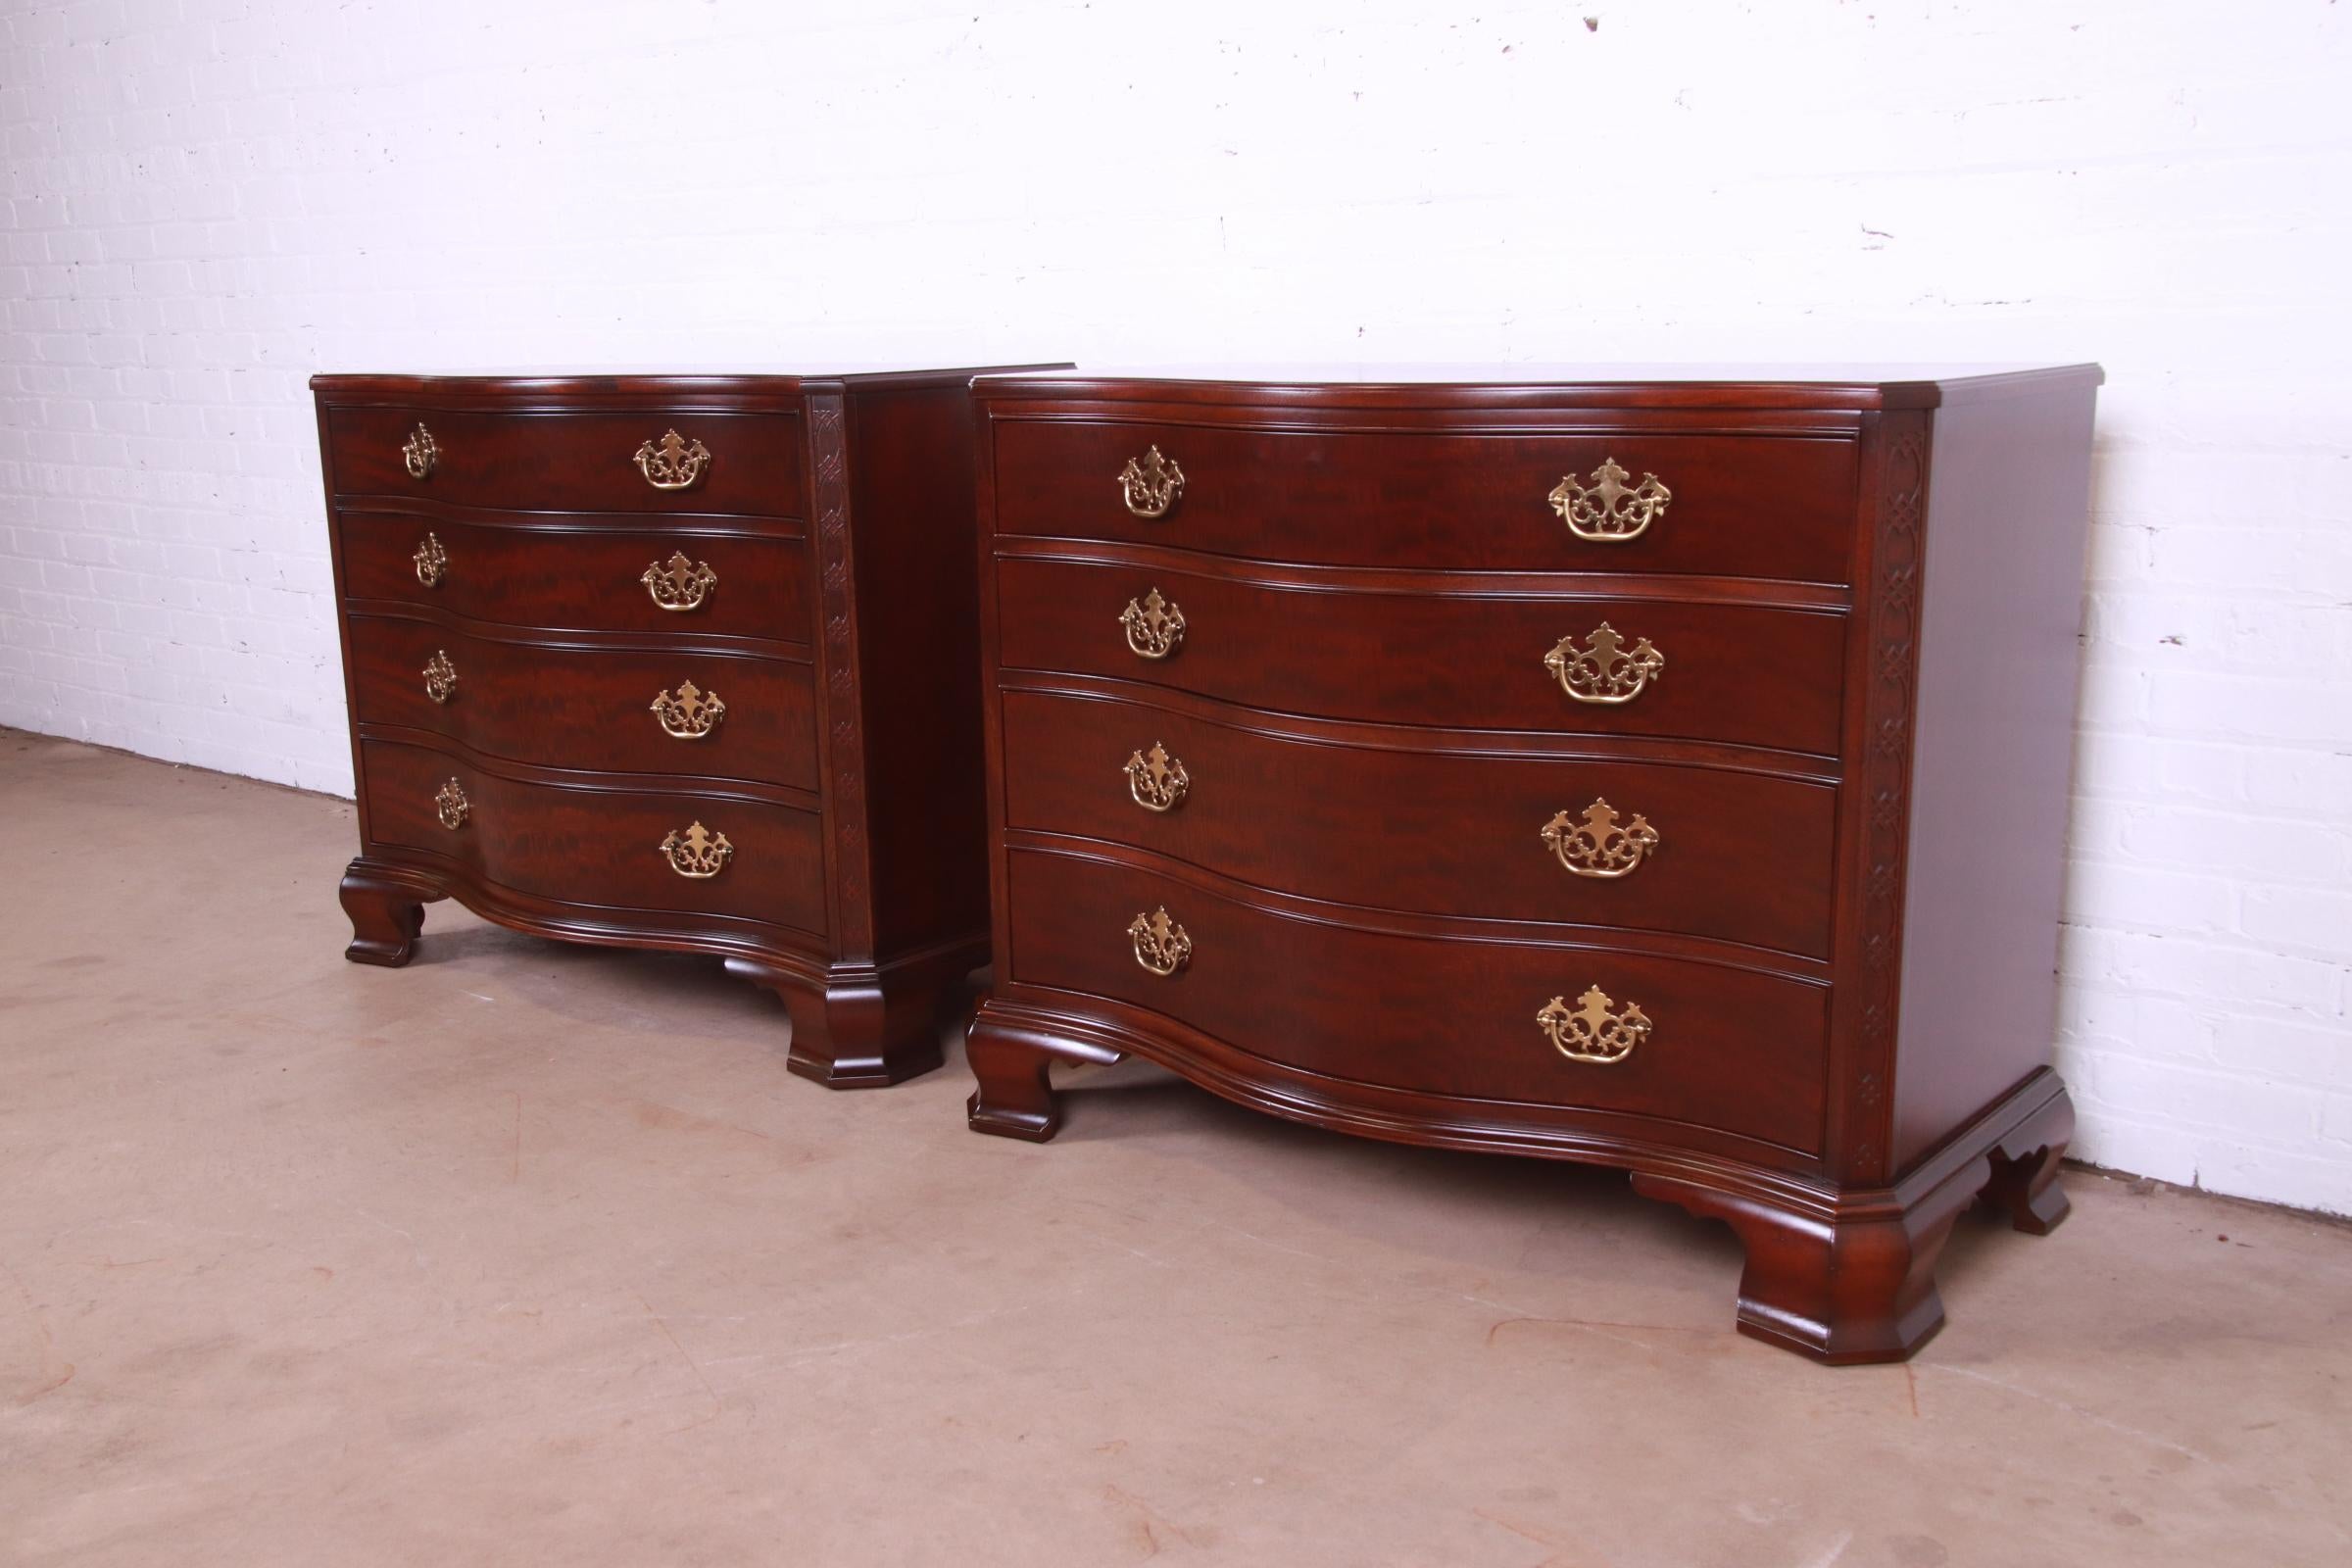 Baker Furniture Chippendale Carved Mahogany Serpentine Dresser Chests, Pair In Good Condition For Sale In South Bend, IN